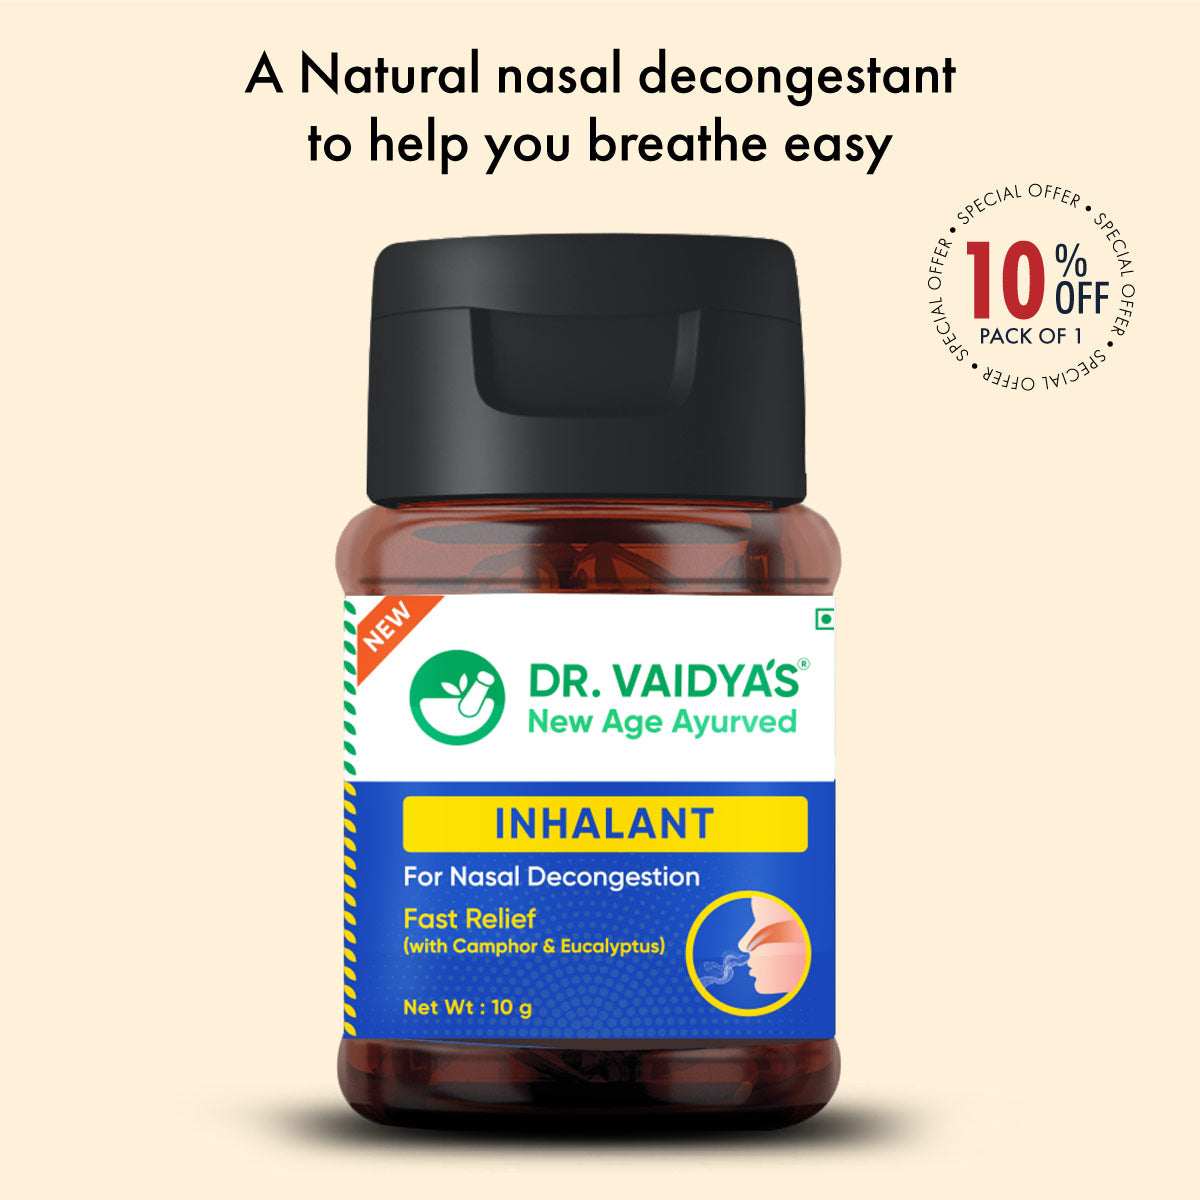 Inhalant: To Decongest Blocked Nose, Relieve Headache & Ease Breathing.